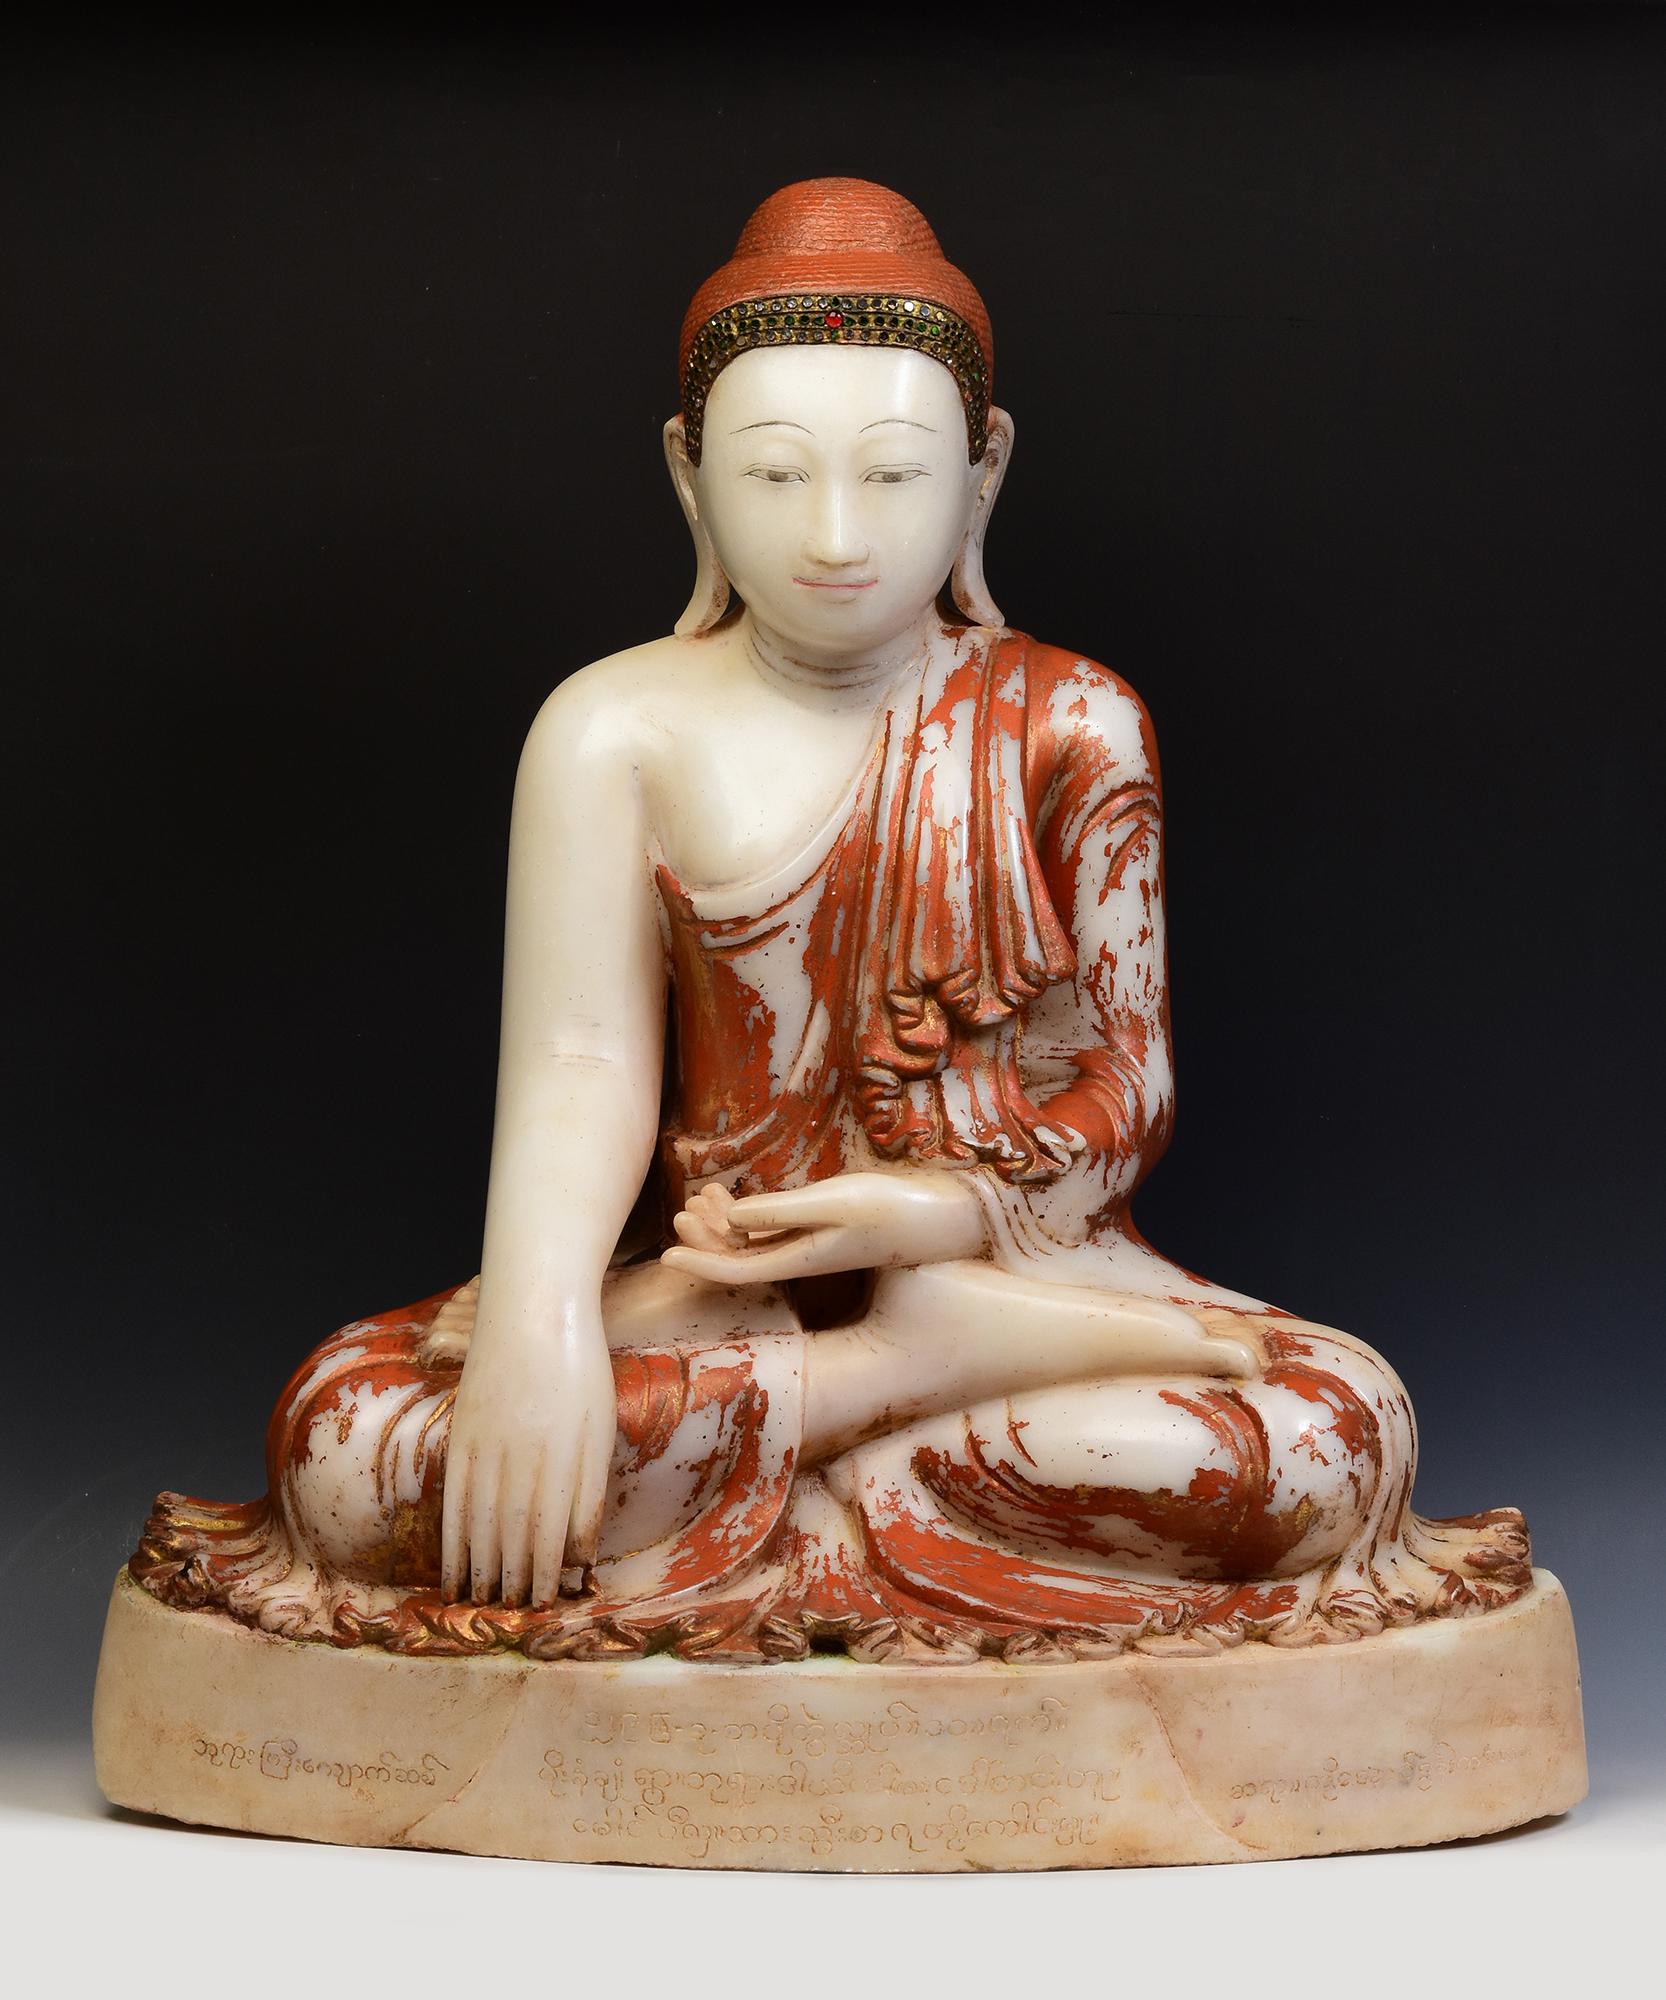 Antique Burmese alabaster Buddha sitting in Mara Vijaya (calling the earth to witness) posture on a base, with original lacquer and inlay of colorful glass pieces on the headband.

Age: Burma, Mandalay Period, 19th Century
Size: Height 75 C.M. /